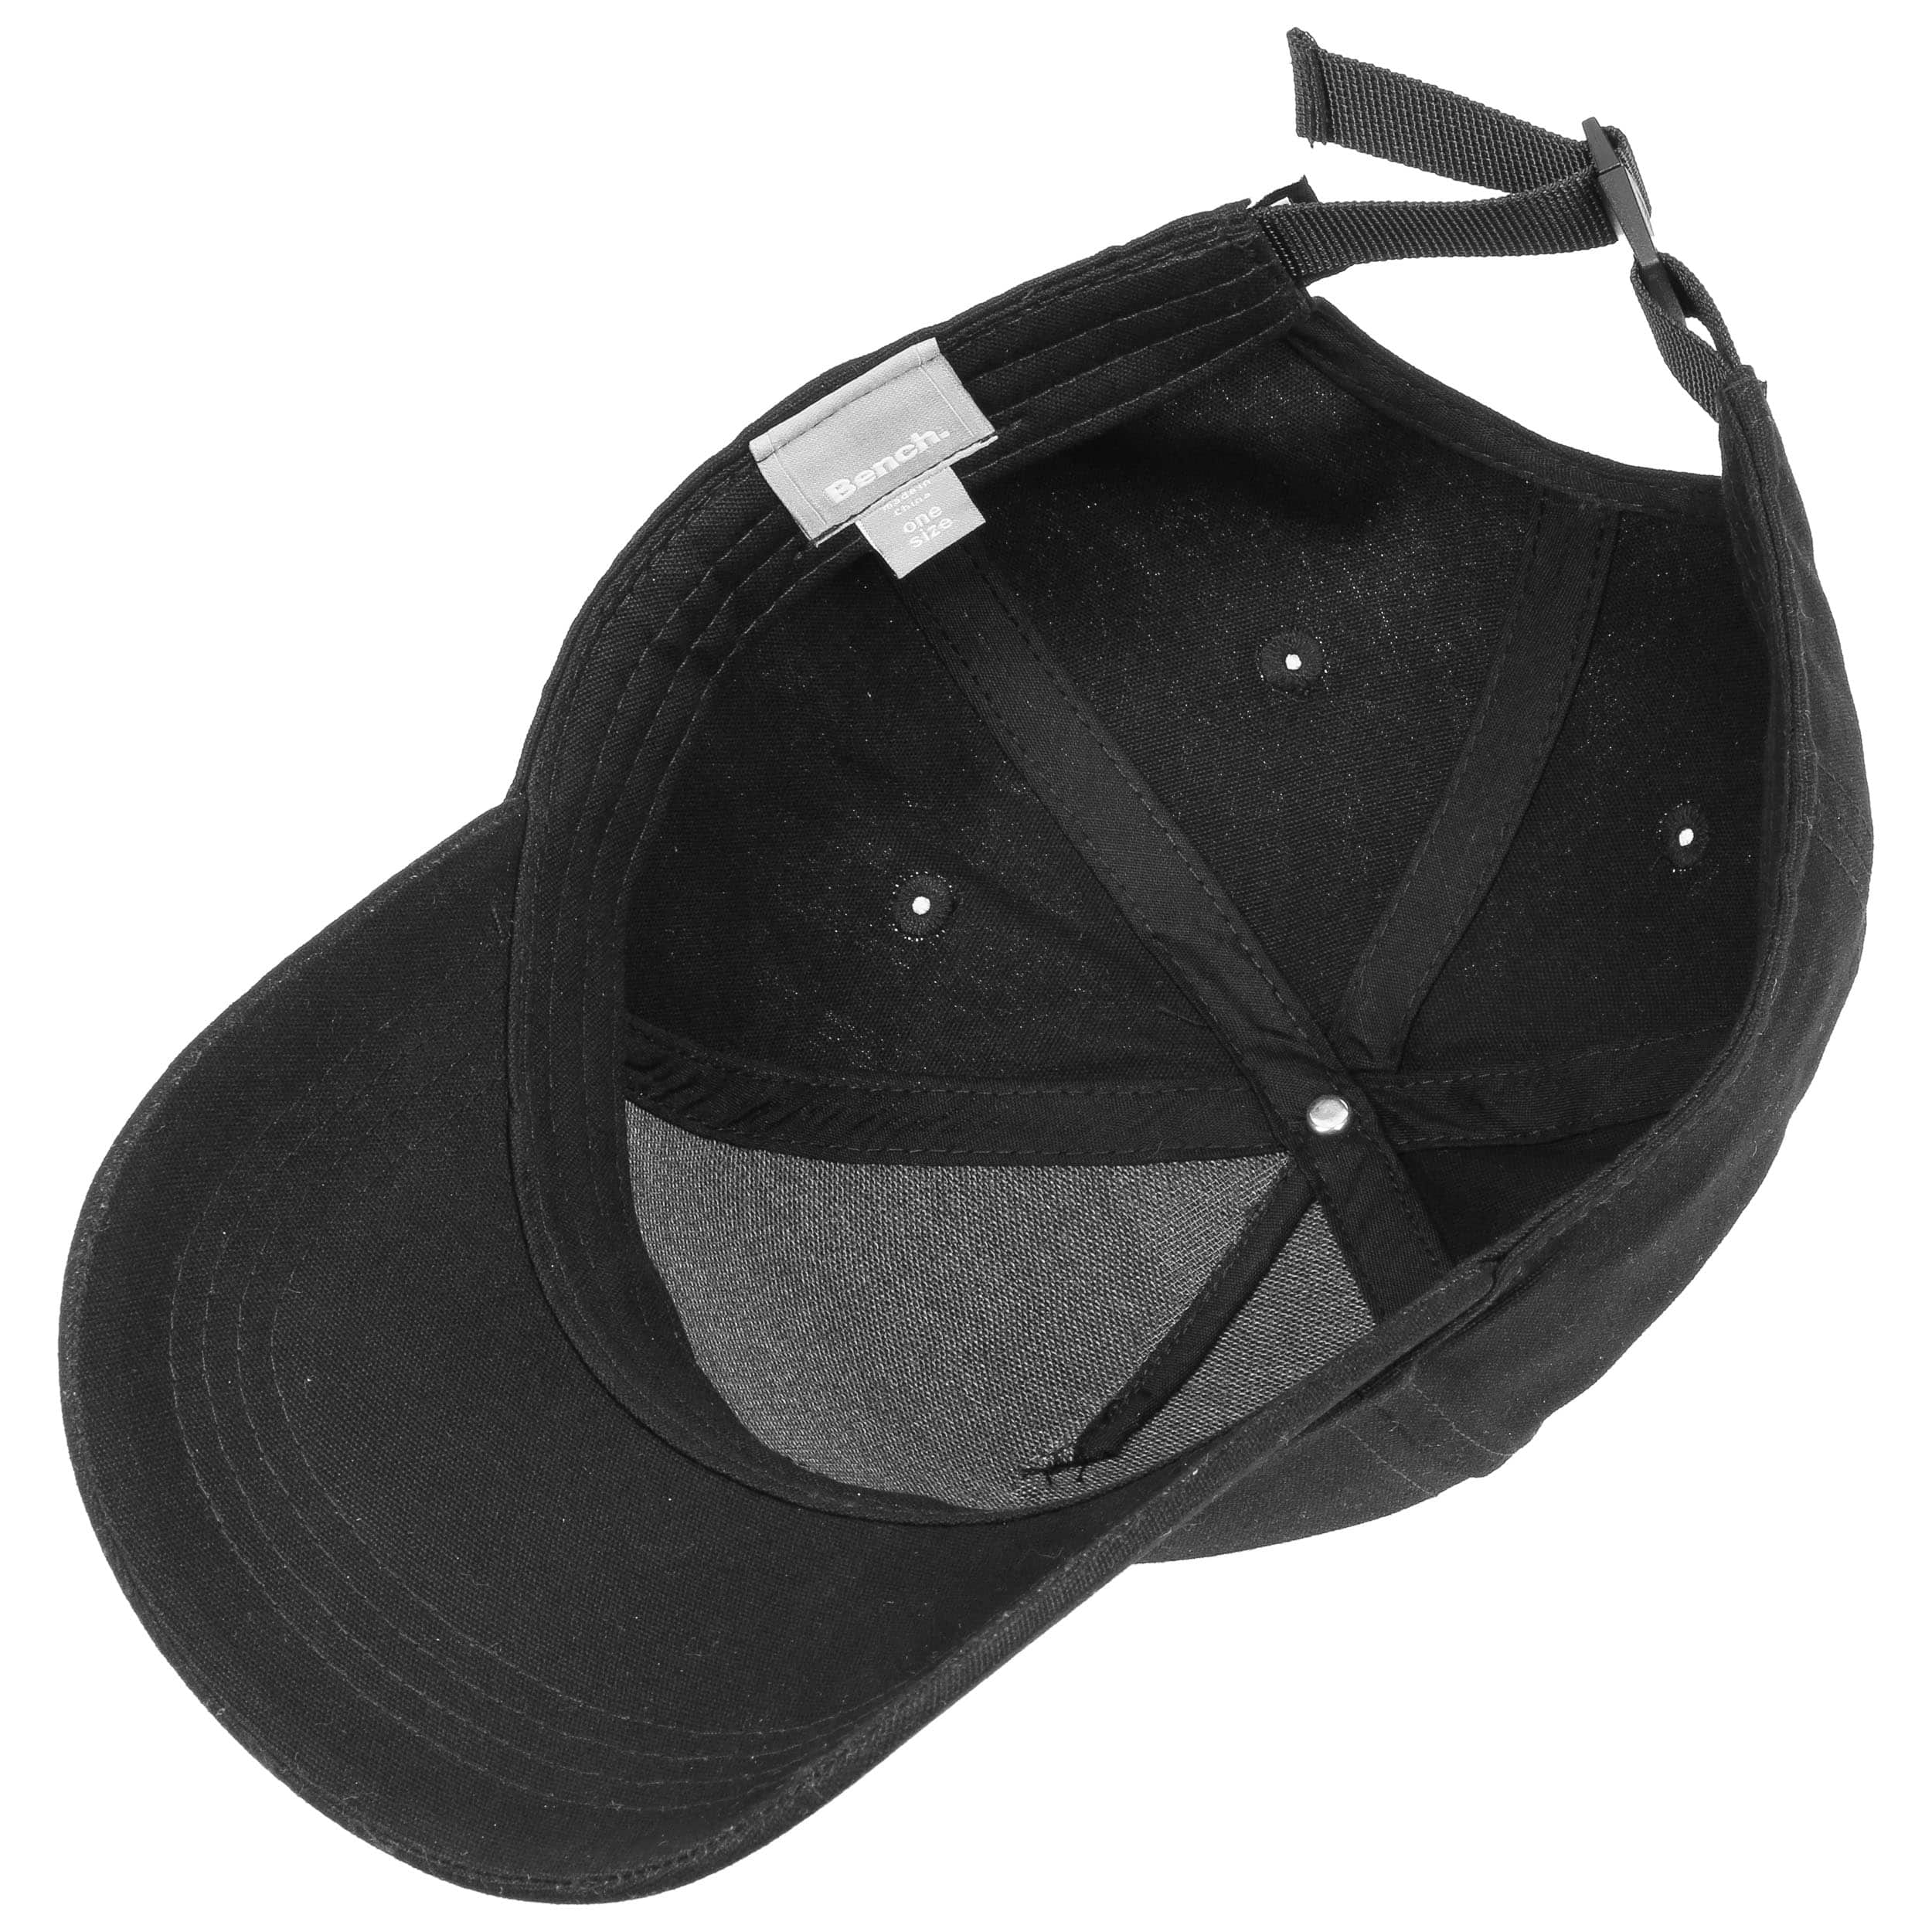 Round Patch Baseball Cap by Bench, GBP 18,95 --> Hats, caps & beanies ...